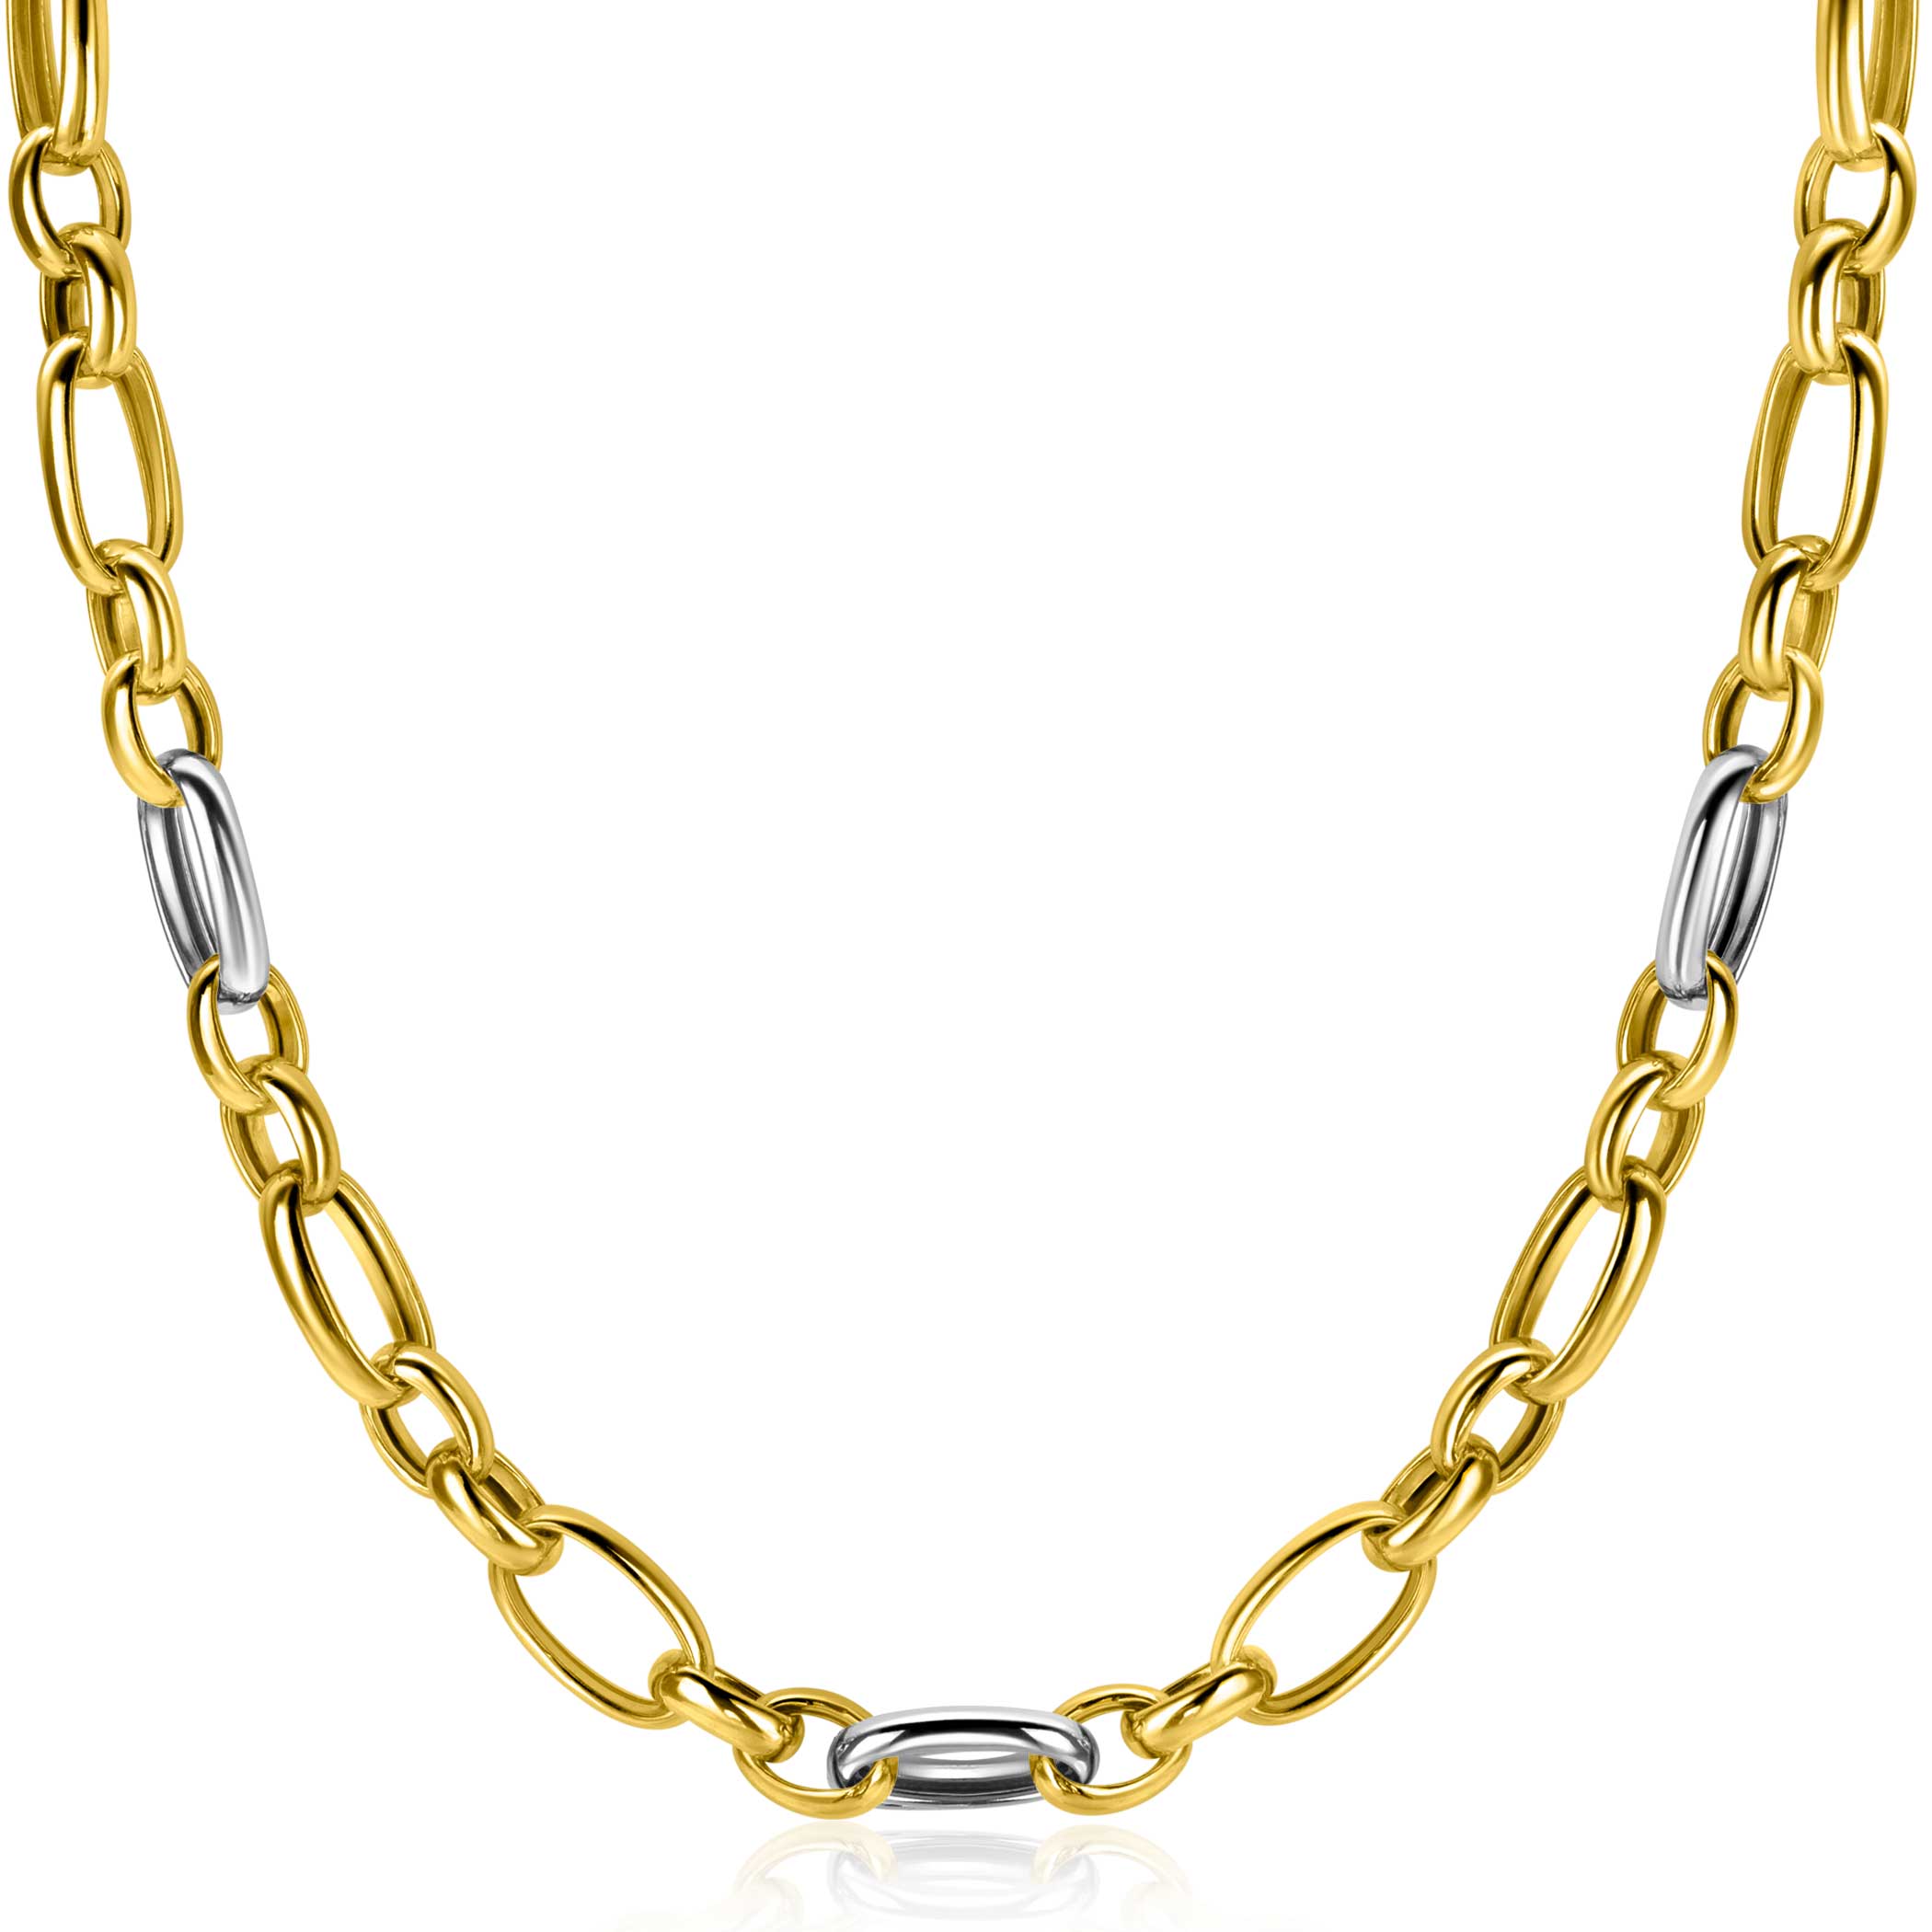 ZINZI bicolor chain necklace (7mm wide) with alternating gold plated jasseron links and large silver oval links 45cm ZIC2639